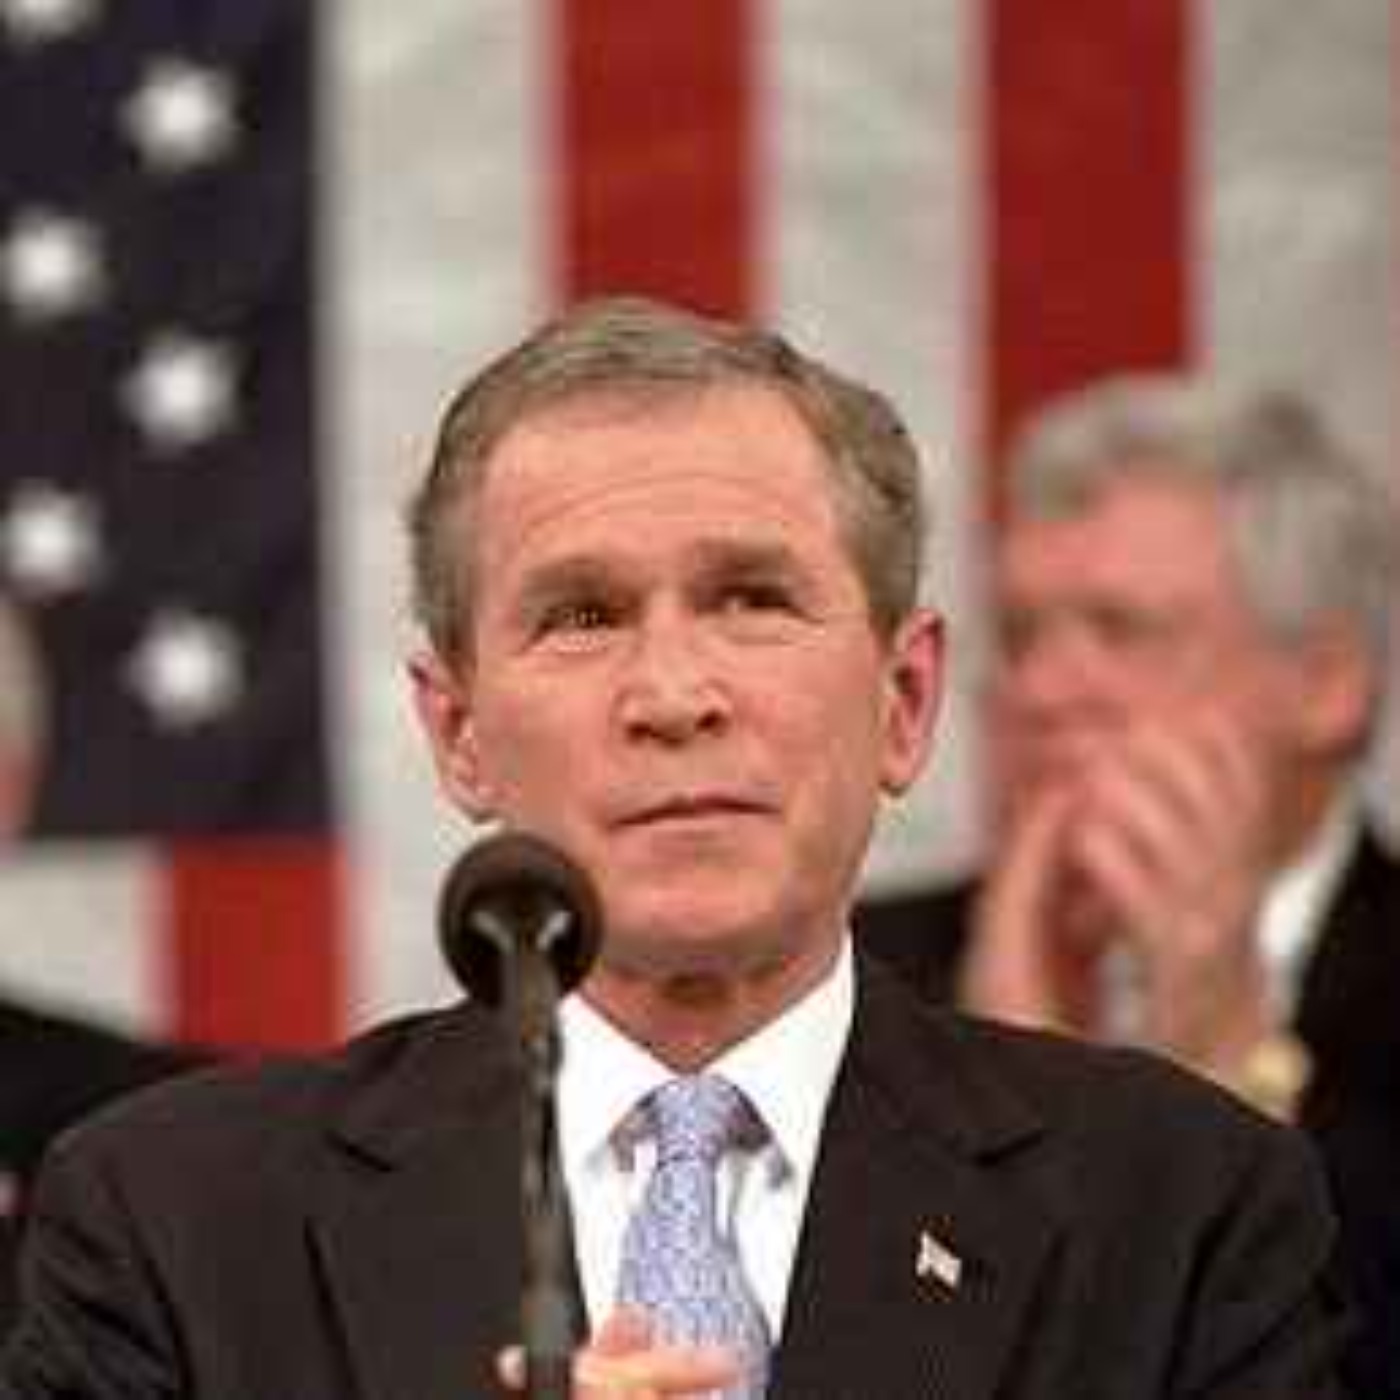 Bush, Frum and the Axis of Evil